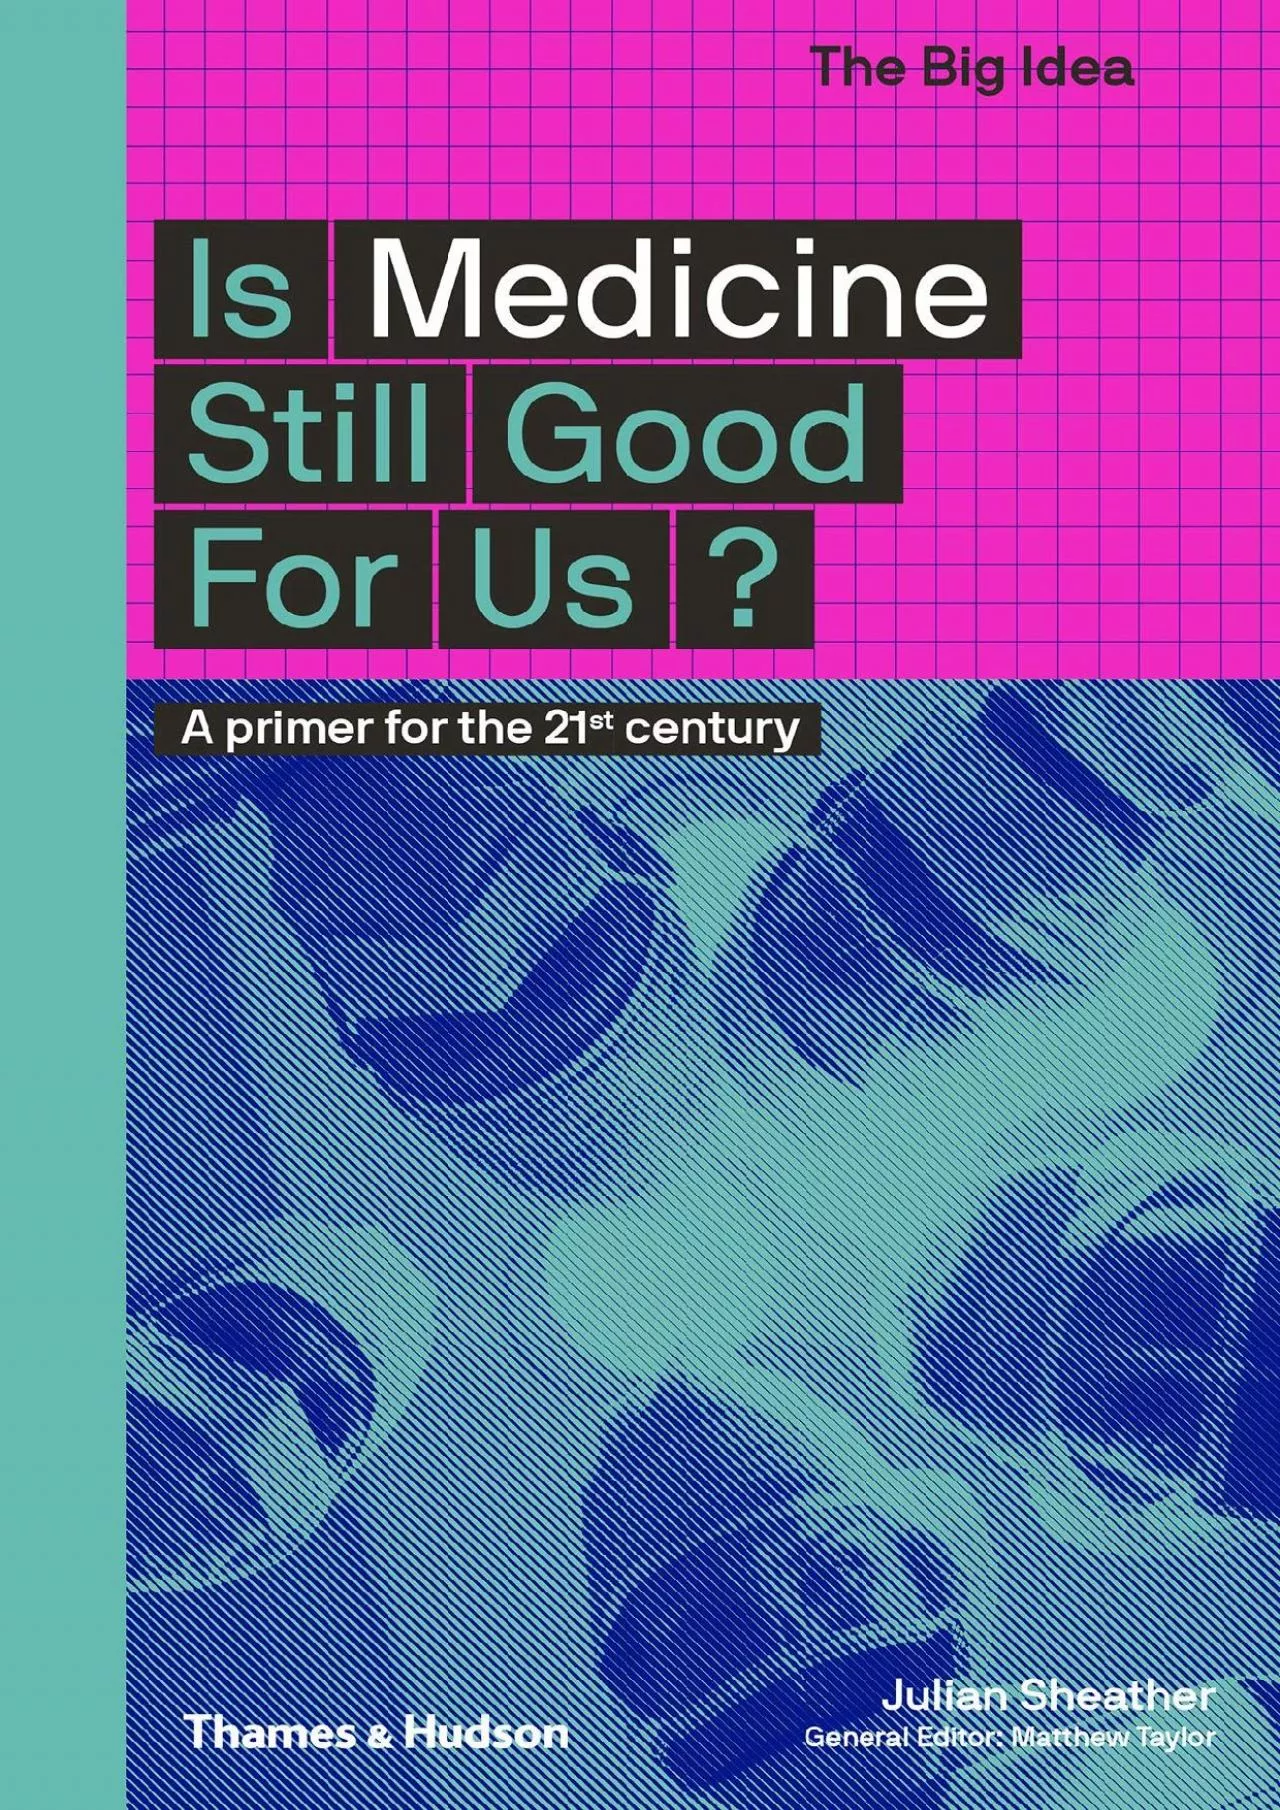 (DOWNLOAD)-Is Medicine Still Good for Us?: A Primer for the 21st Century (The Big Idea